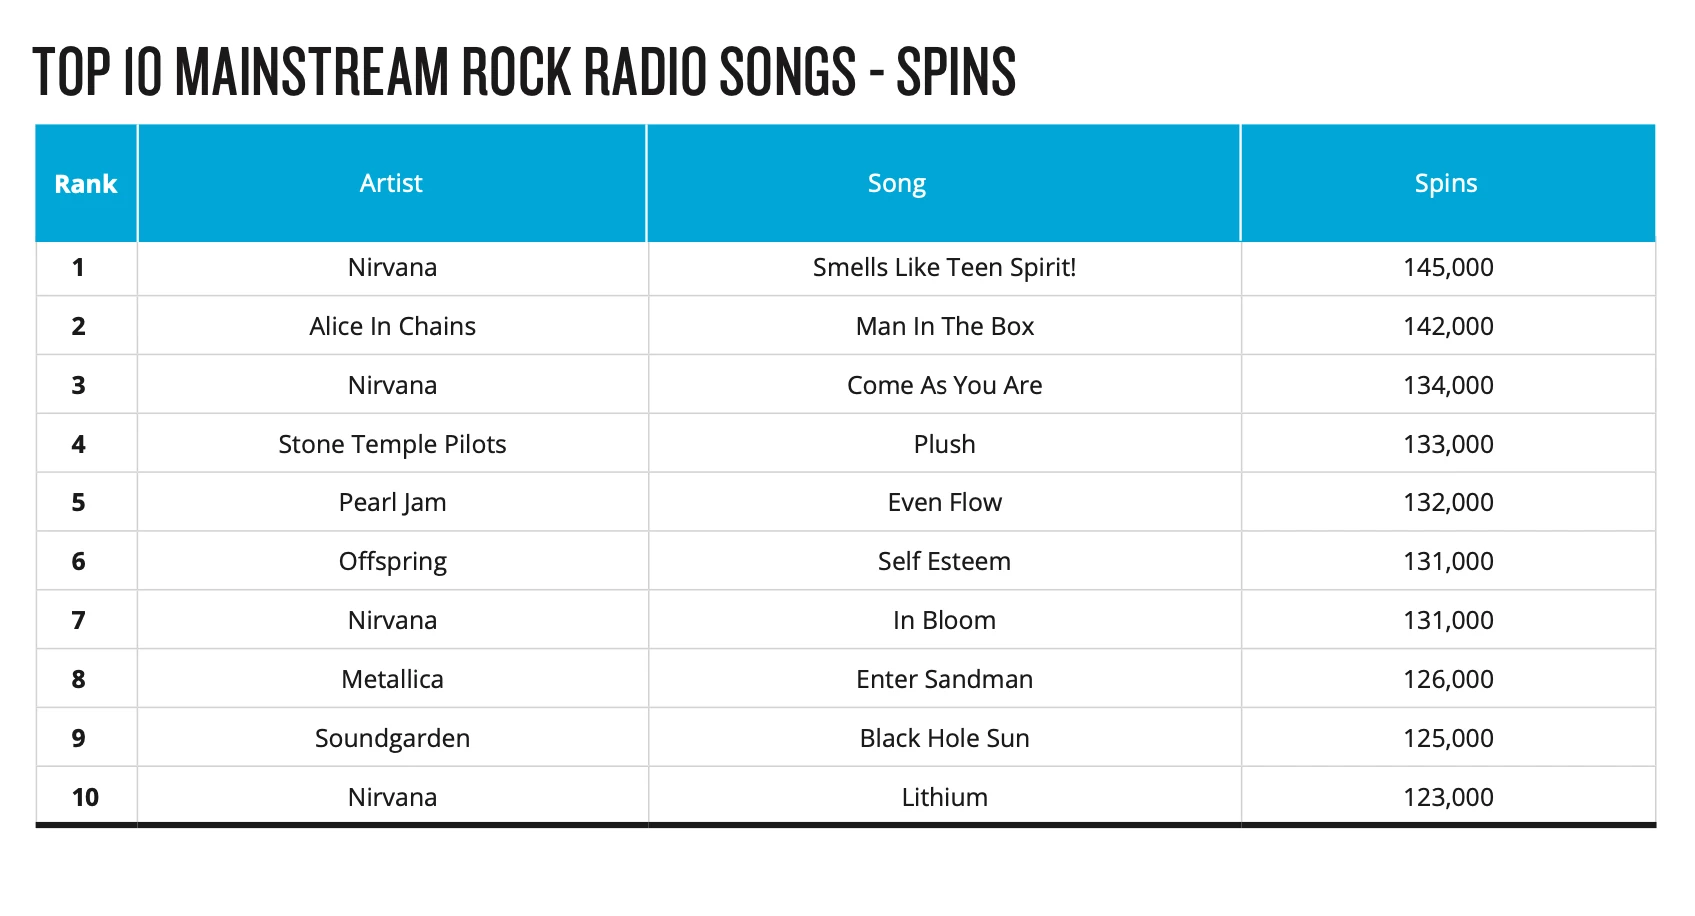 Nirvana Were the Most-Played Band of the Decade on Rock Radio